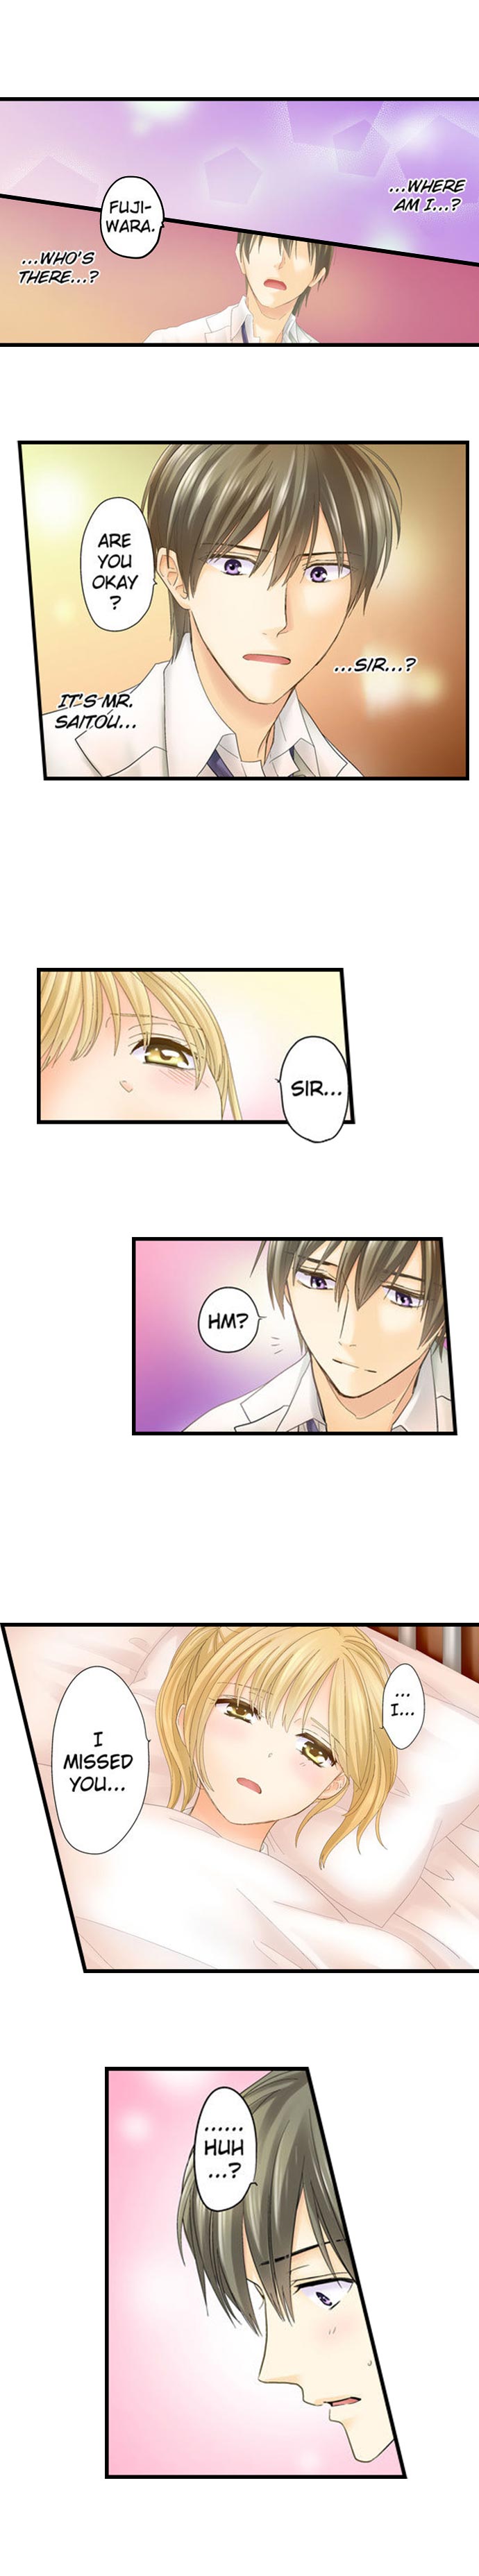 Running a Love Hotel with My Math Teacher - Chapter 7 Page 7